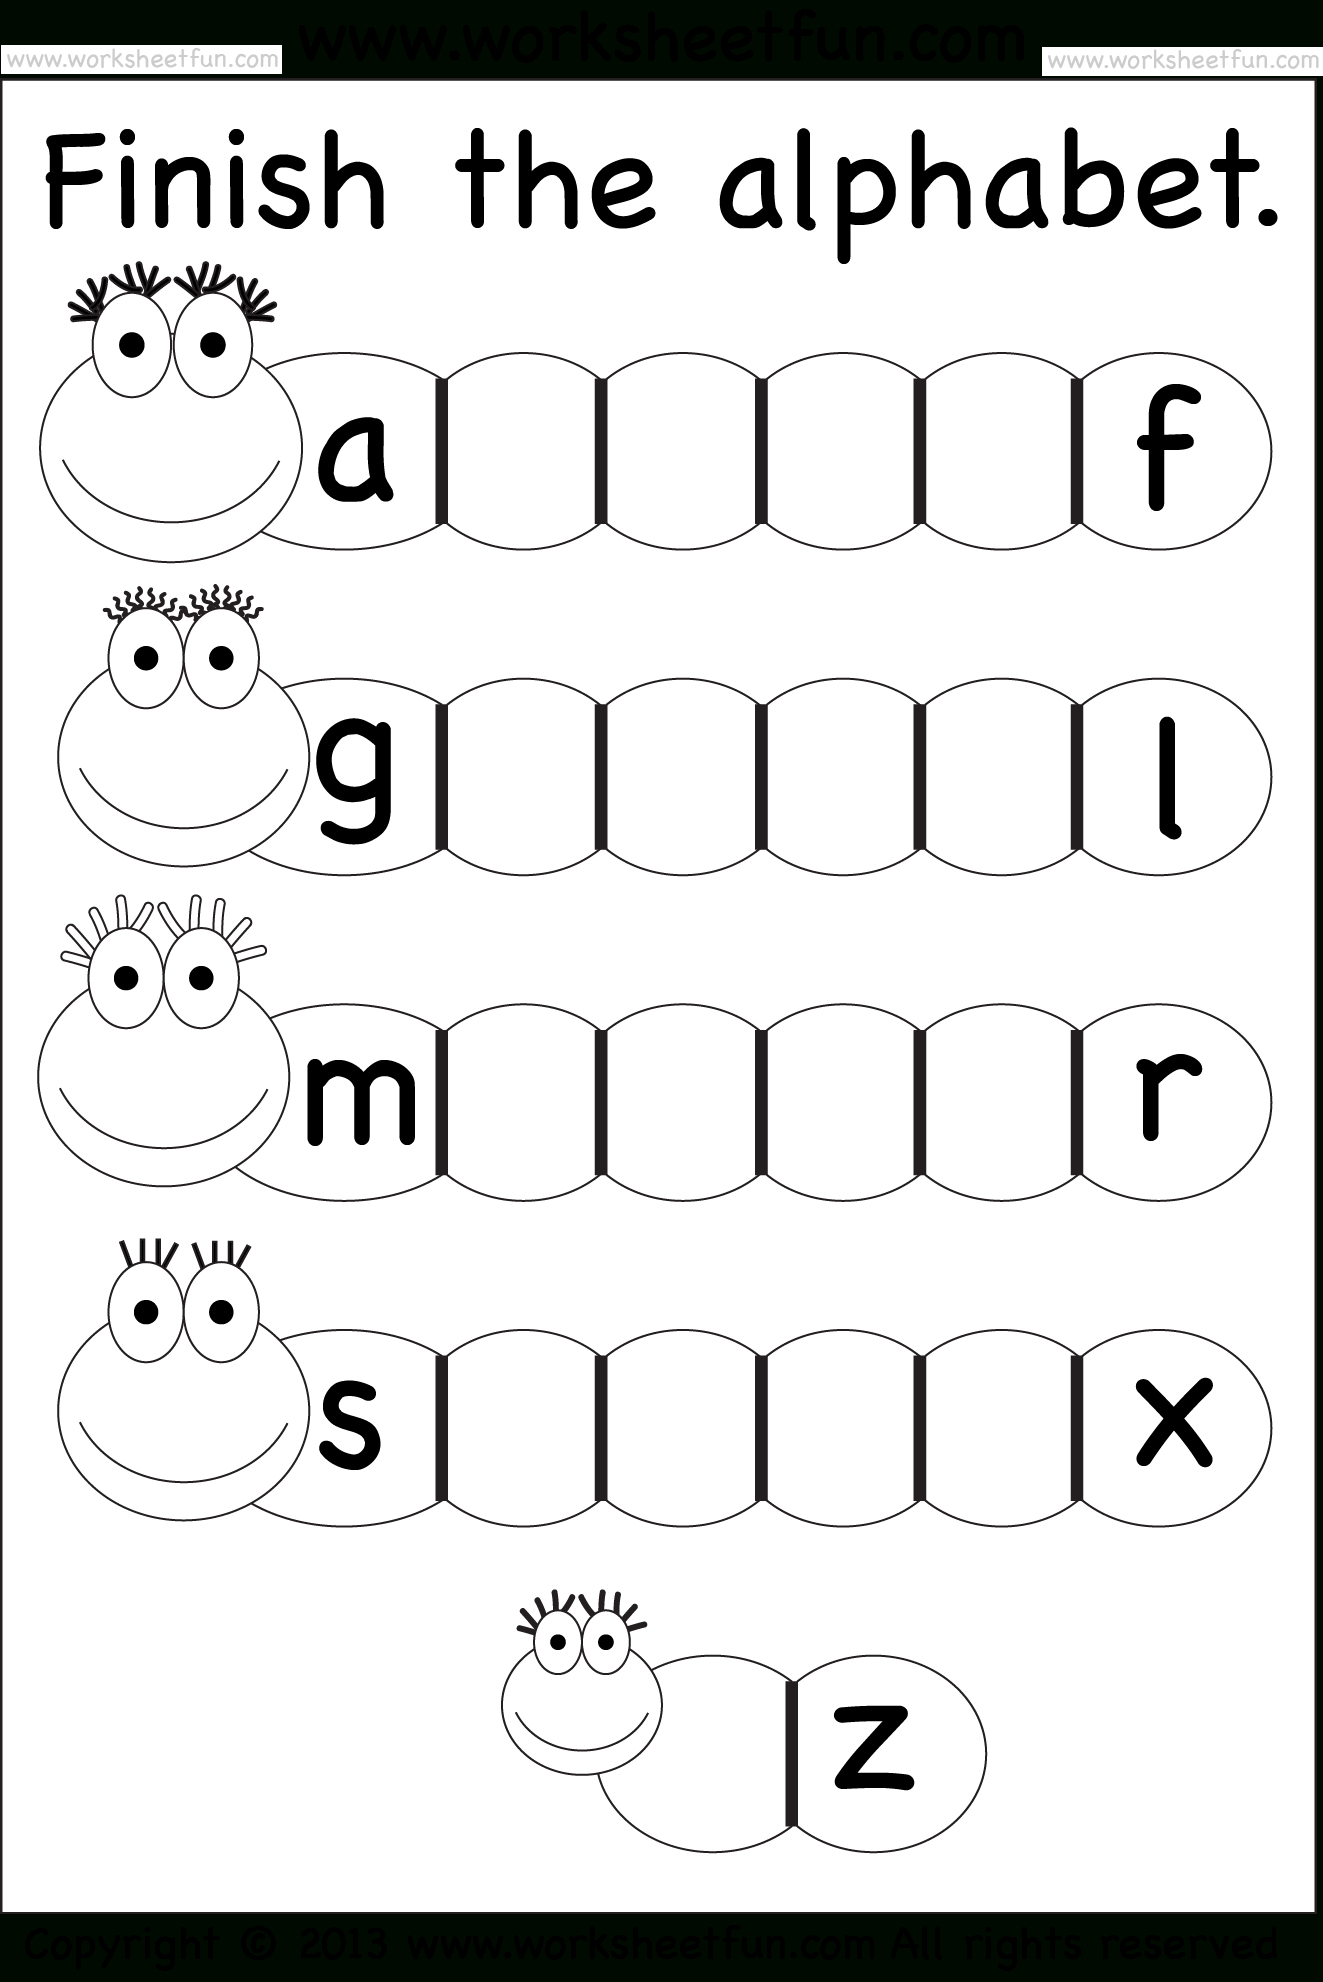 Missing Lowercase Letters – Missing Small Letters in Alphabet Worksheets Print